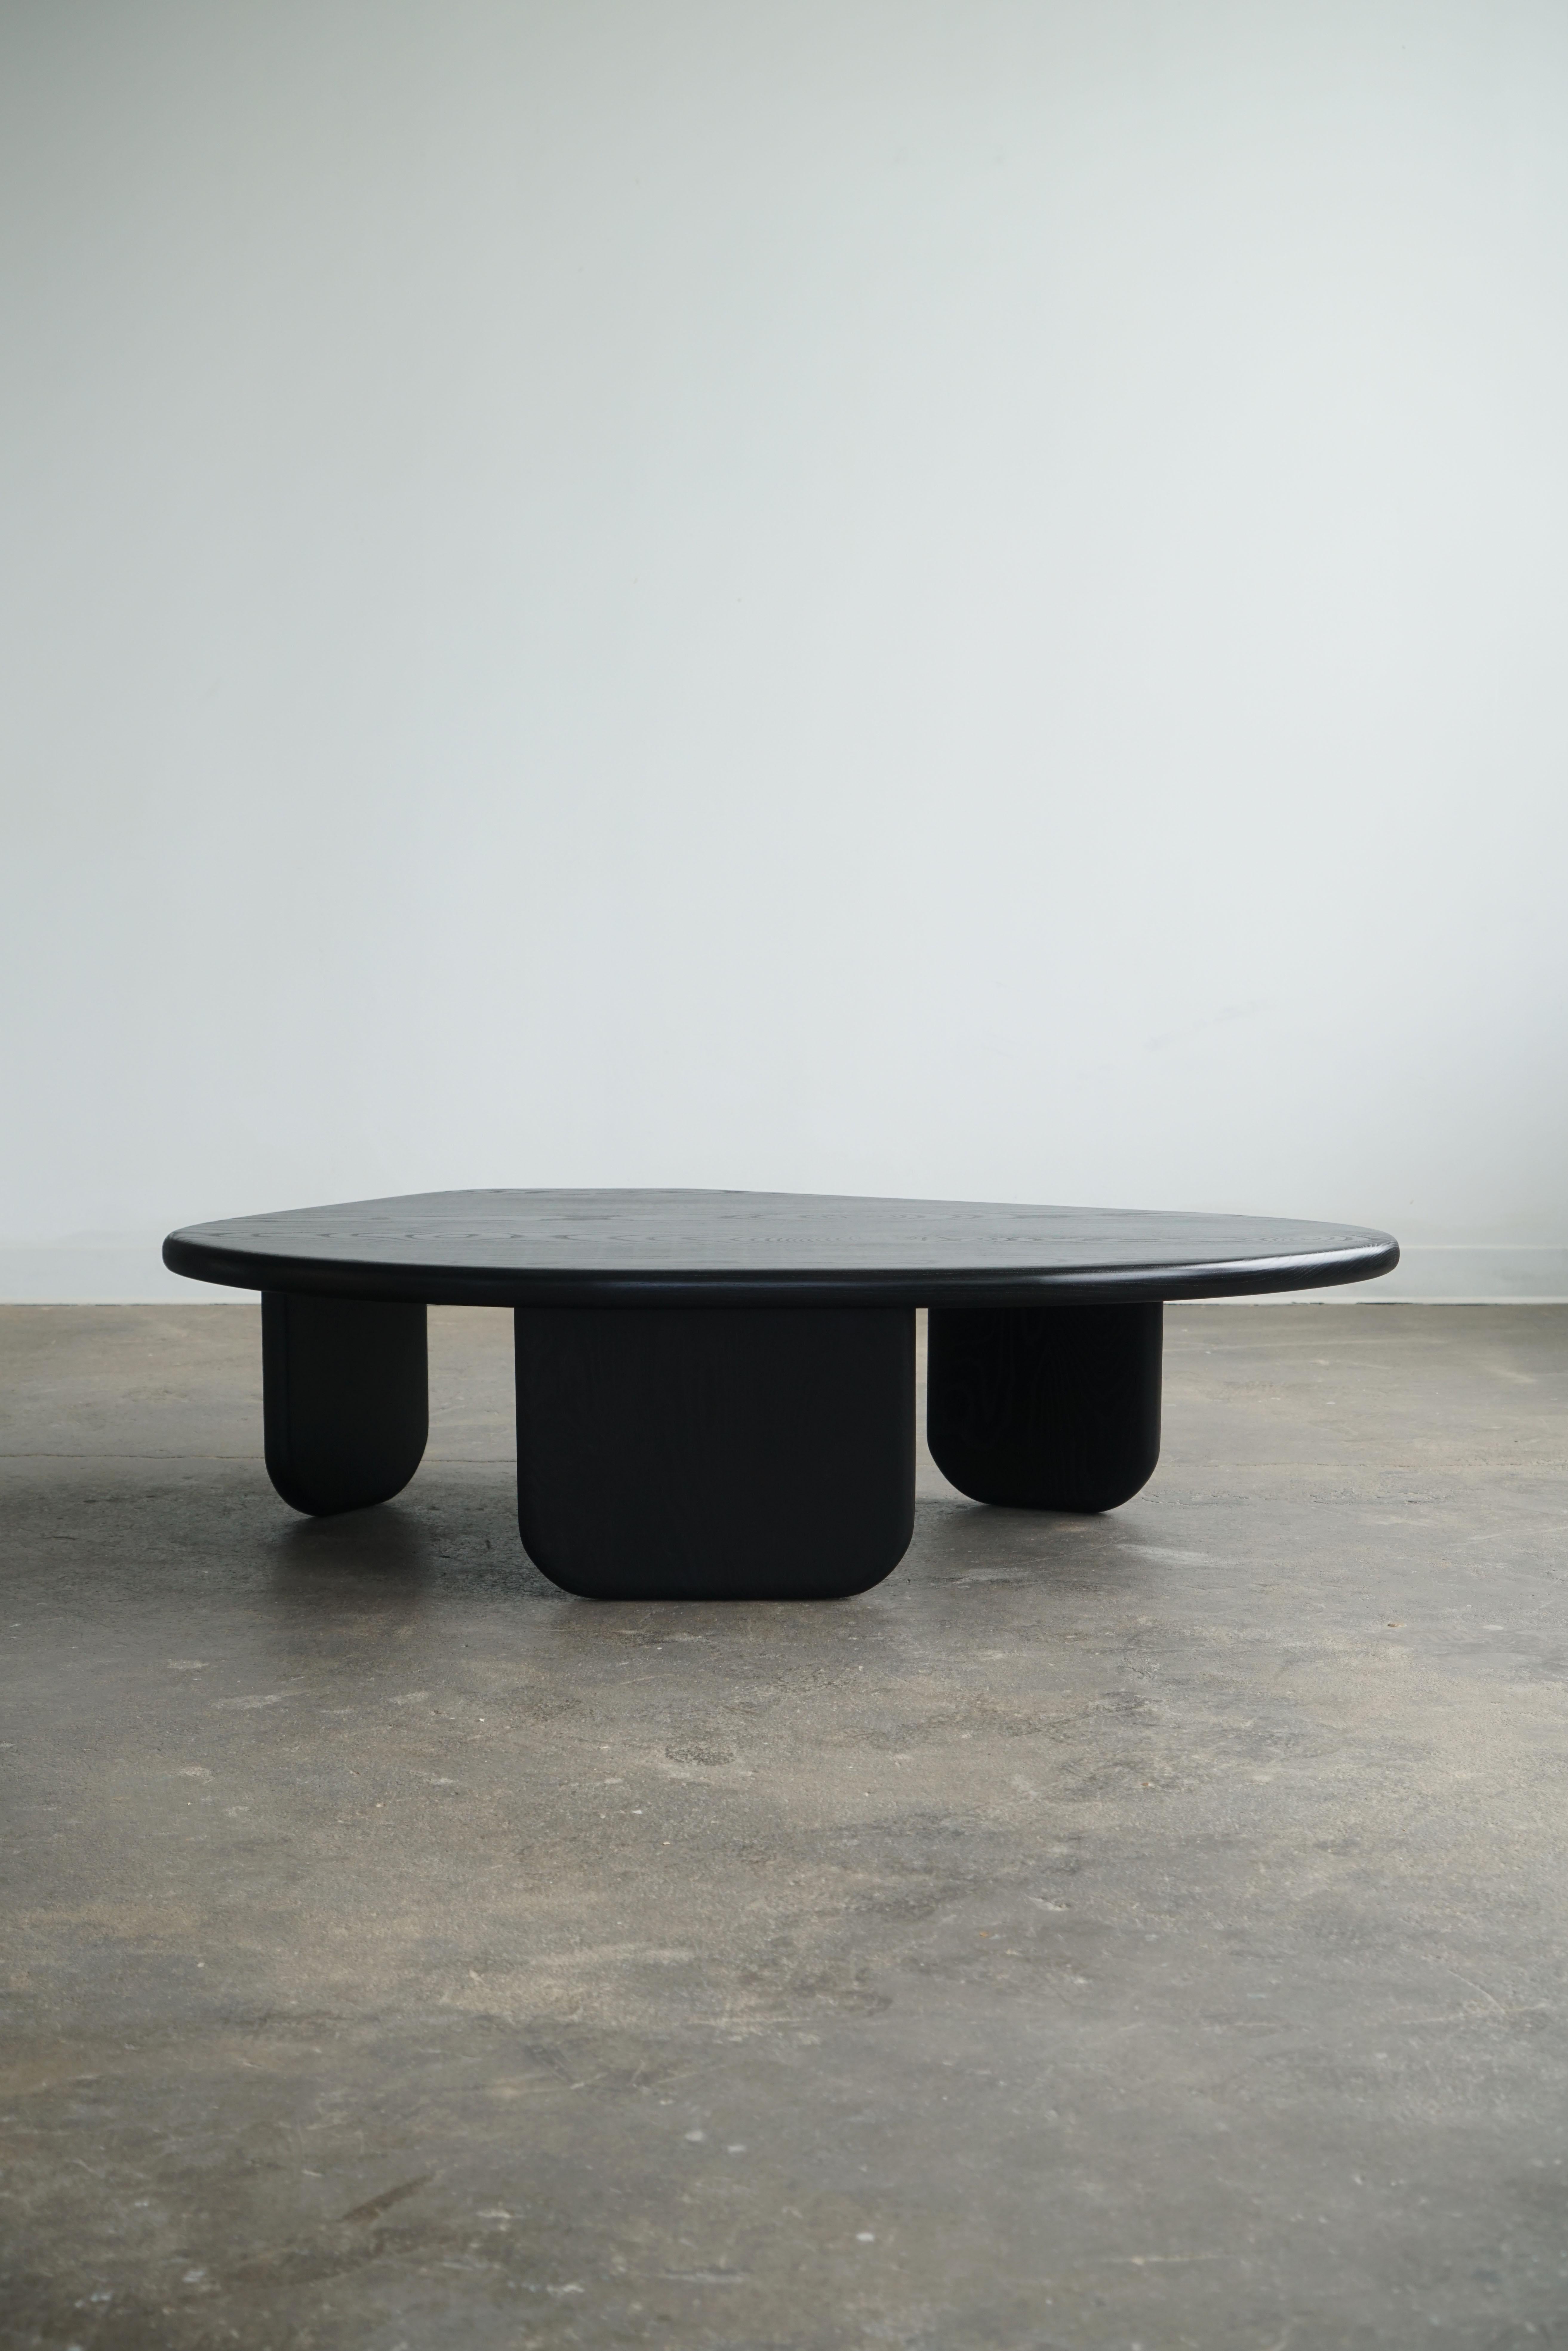 Bleached Organic Shaped Modern Coffee Table by Last Workshop, Jet Black Ash For Sale